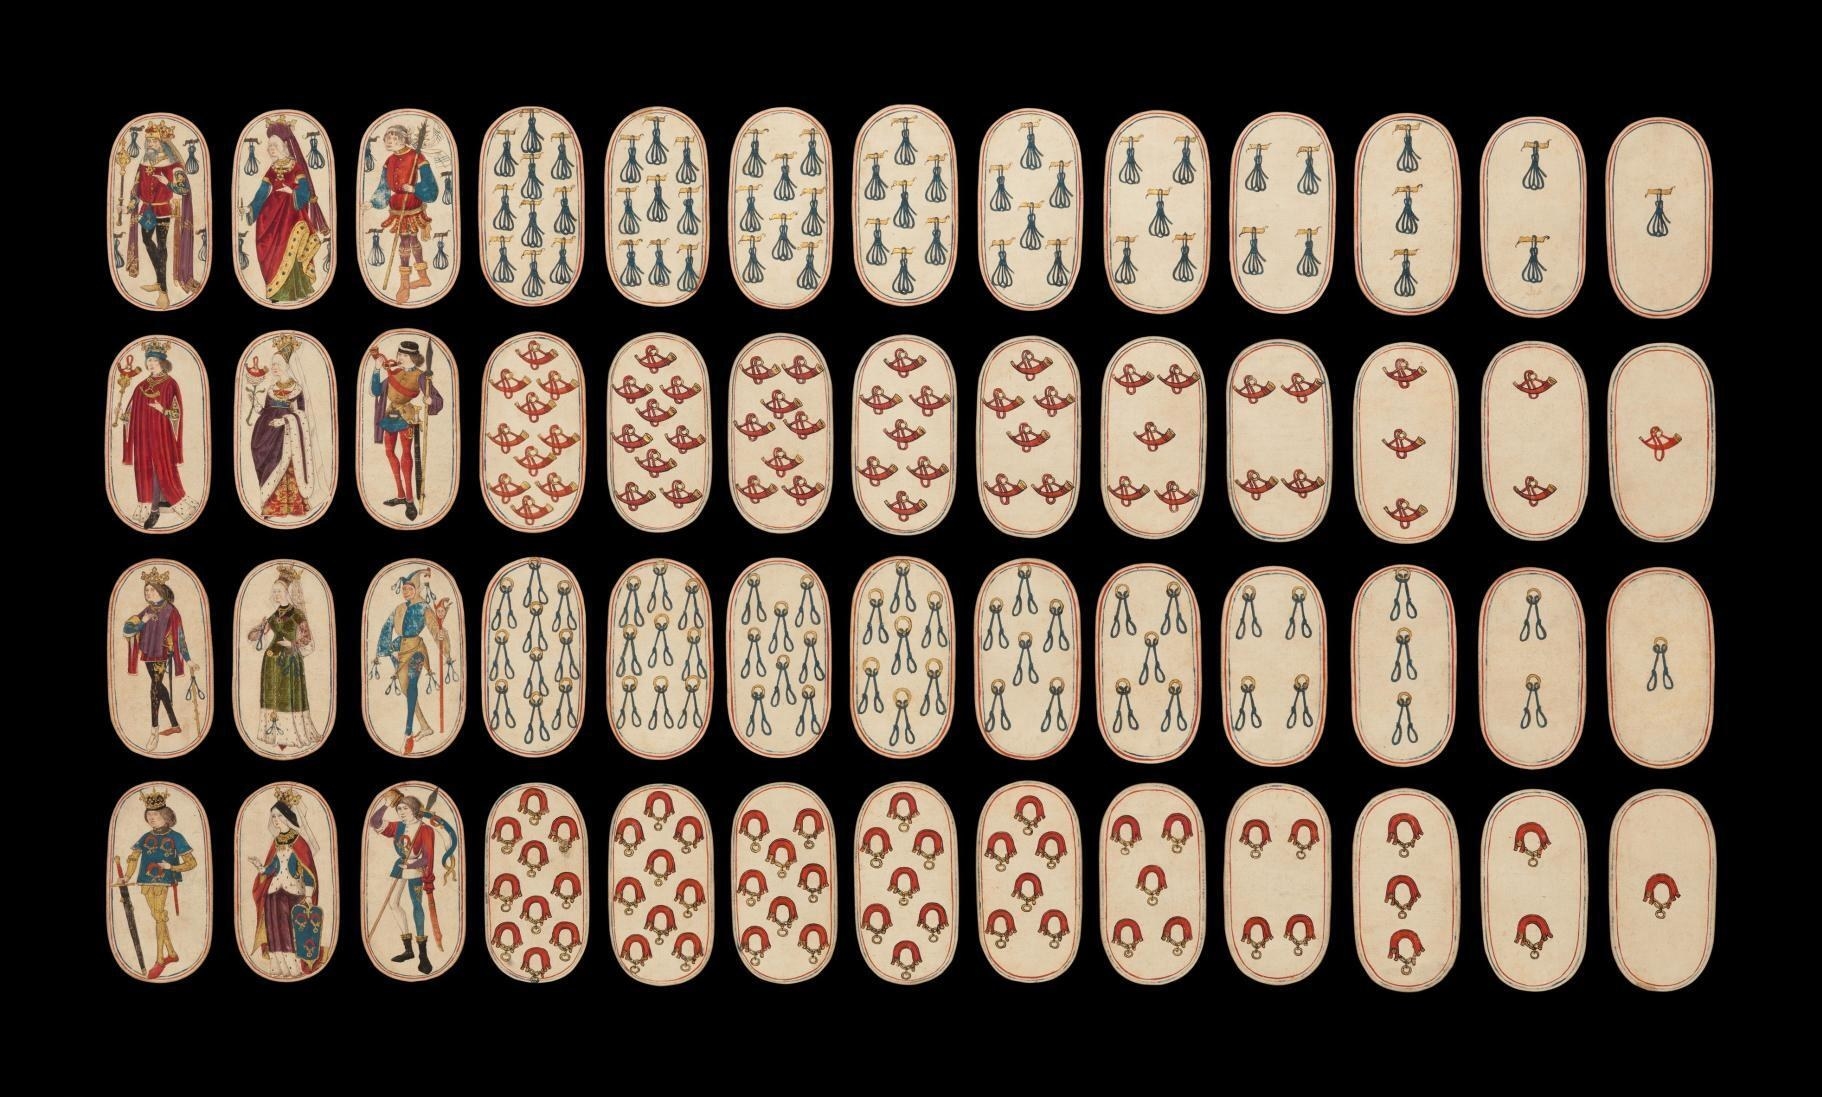 An old deck of cards